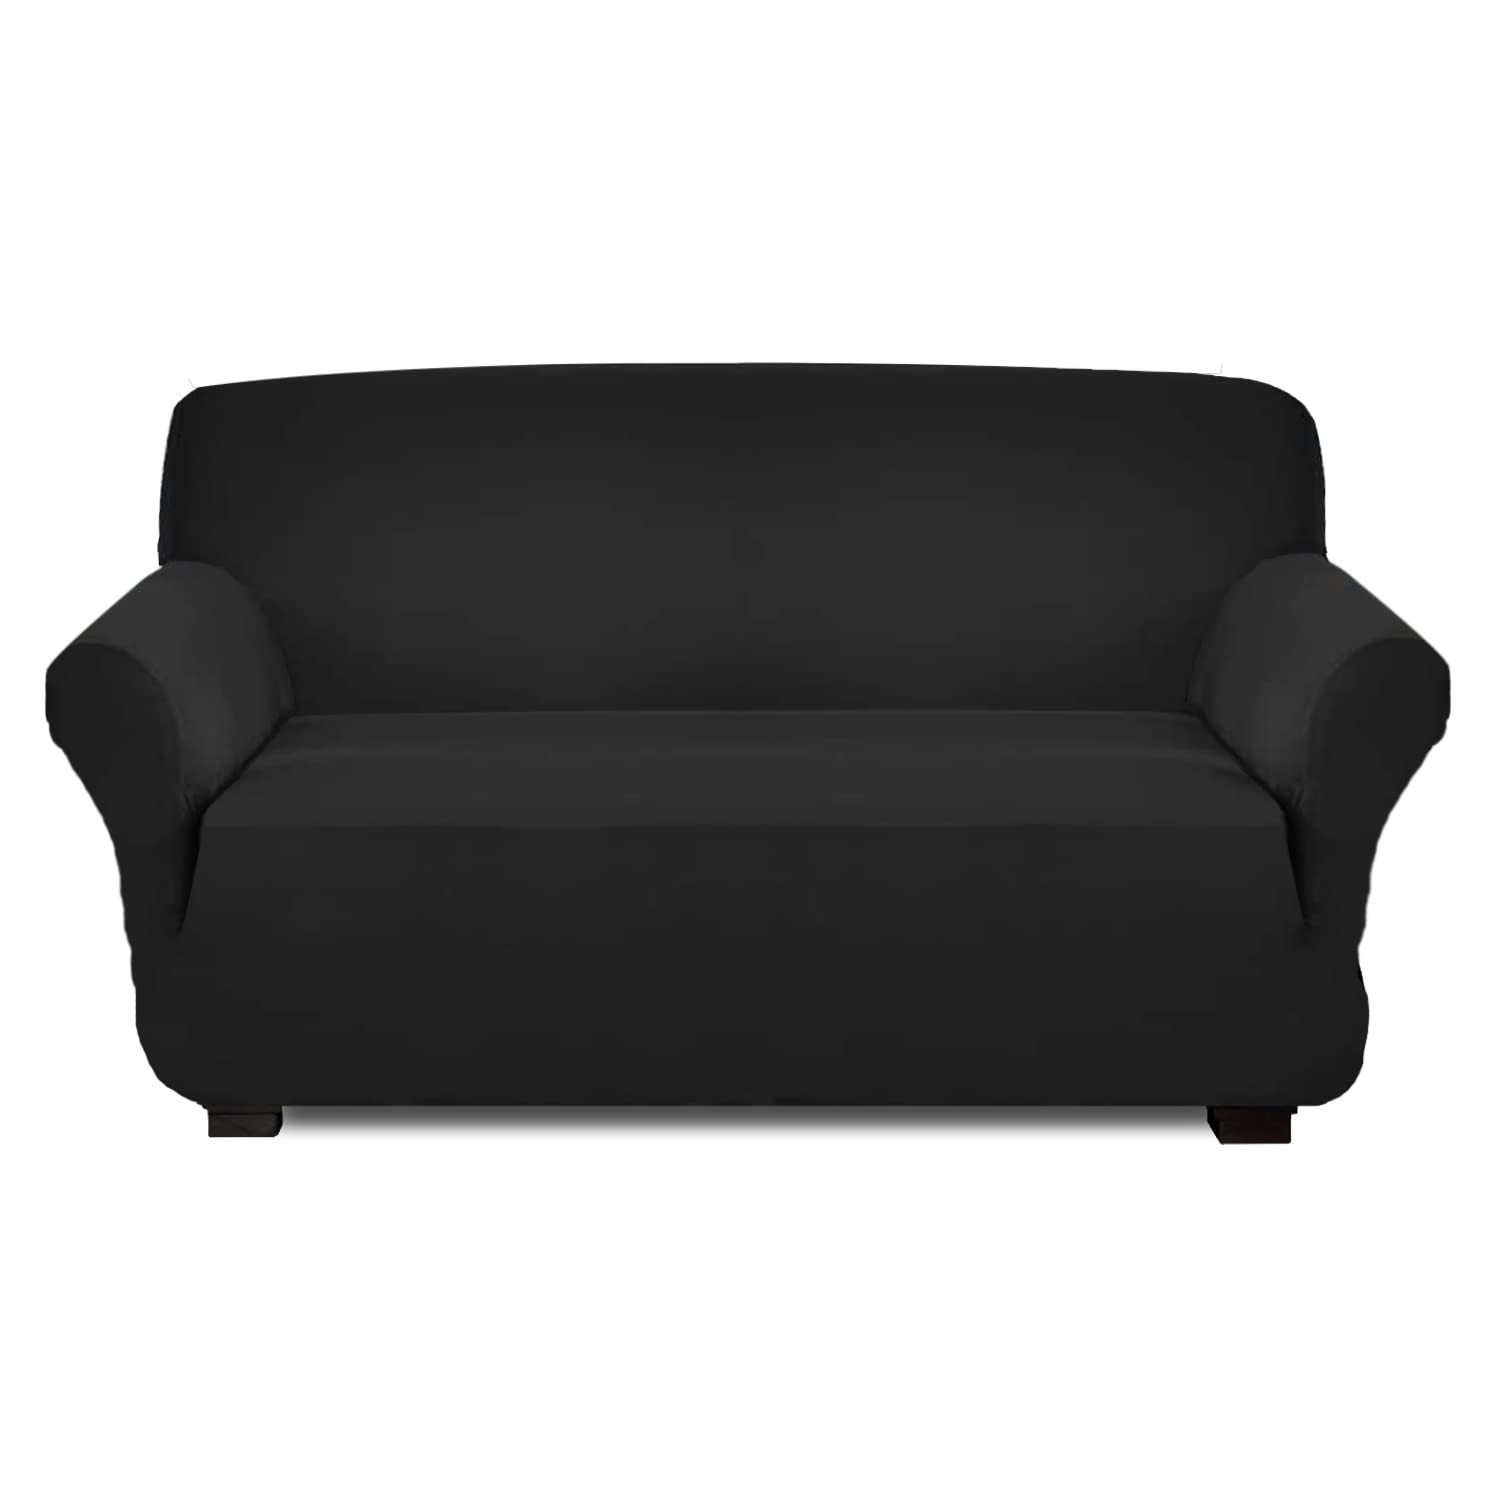 Kuber Industries Premium Two-Seater Comfort Sofa Cover|Polyester Plain Couch Cover|Stretchy Sofa Slipcovers With Foam Sticks (Black)